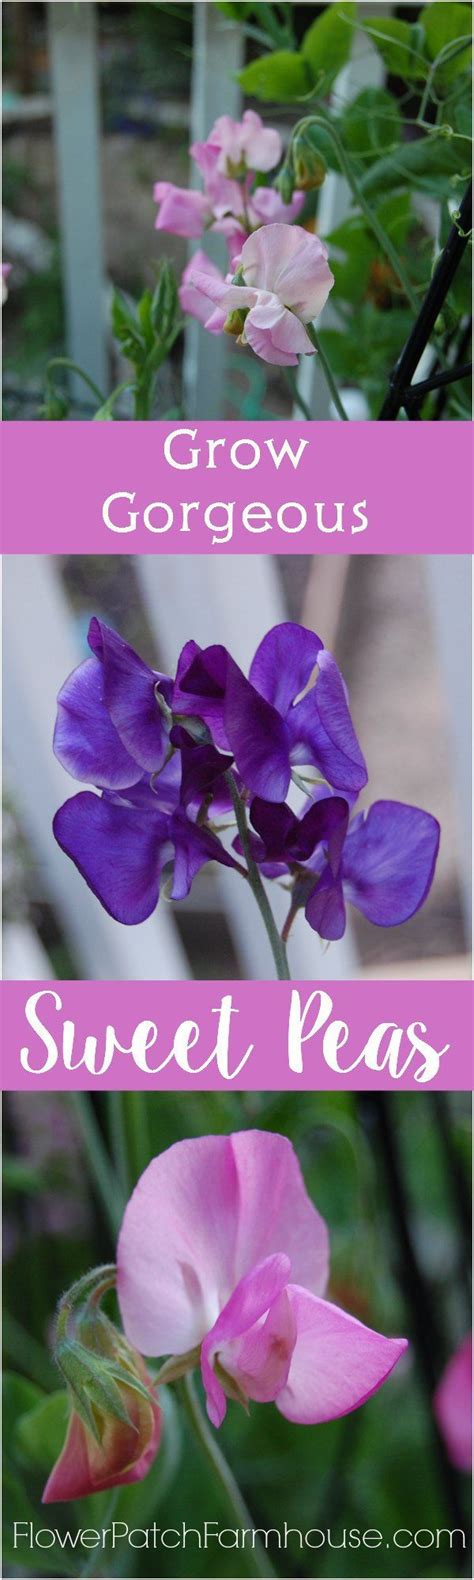 How To Grow Sweet Peas Flower Patch Farmhouse Growing Sweet Peas